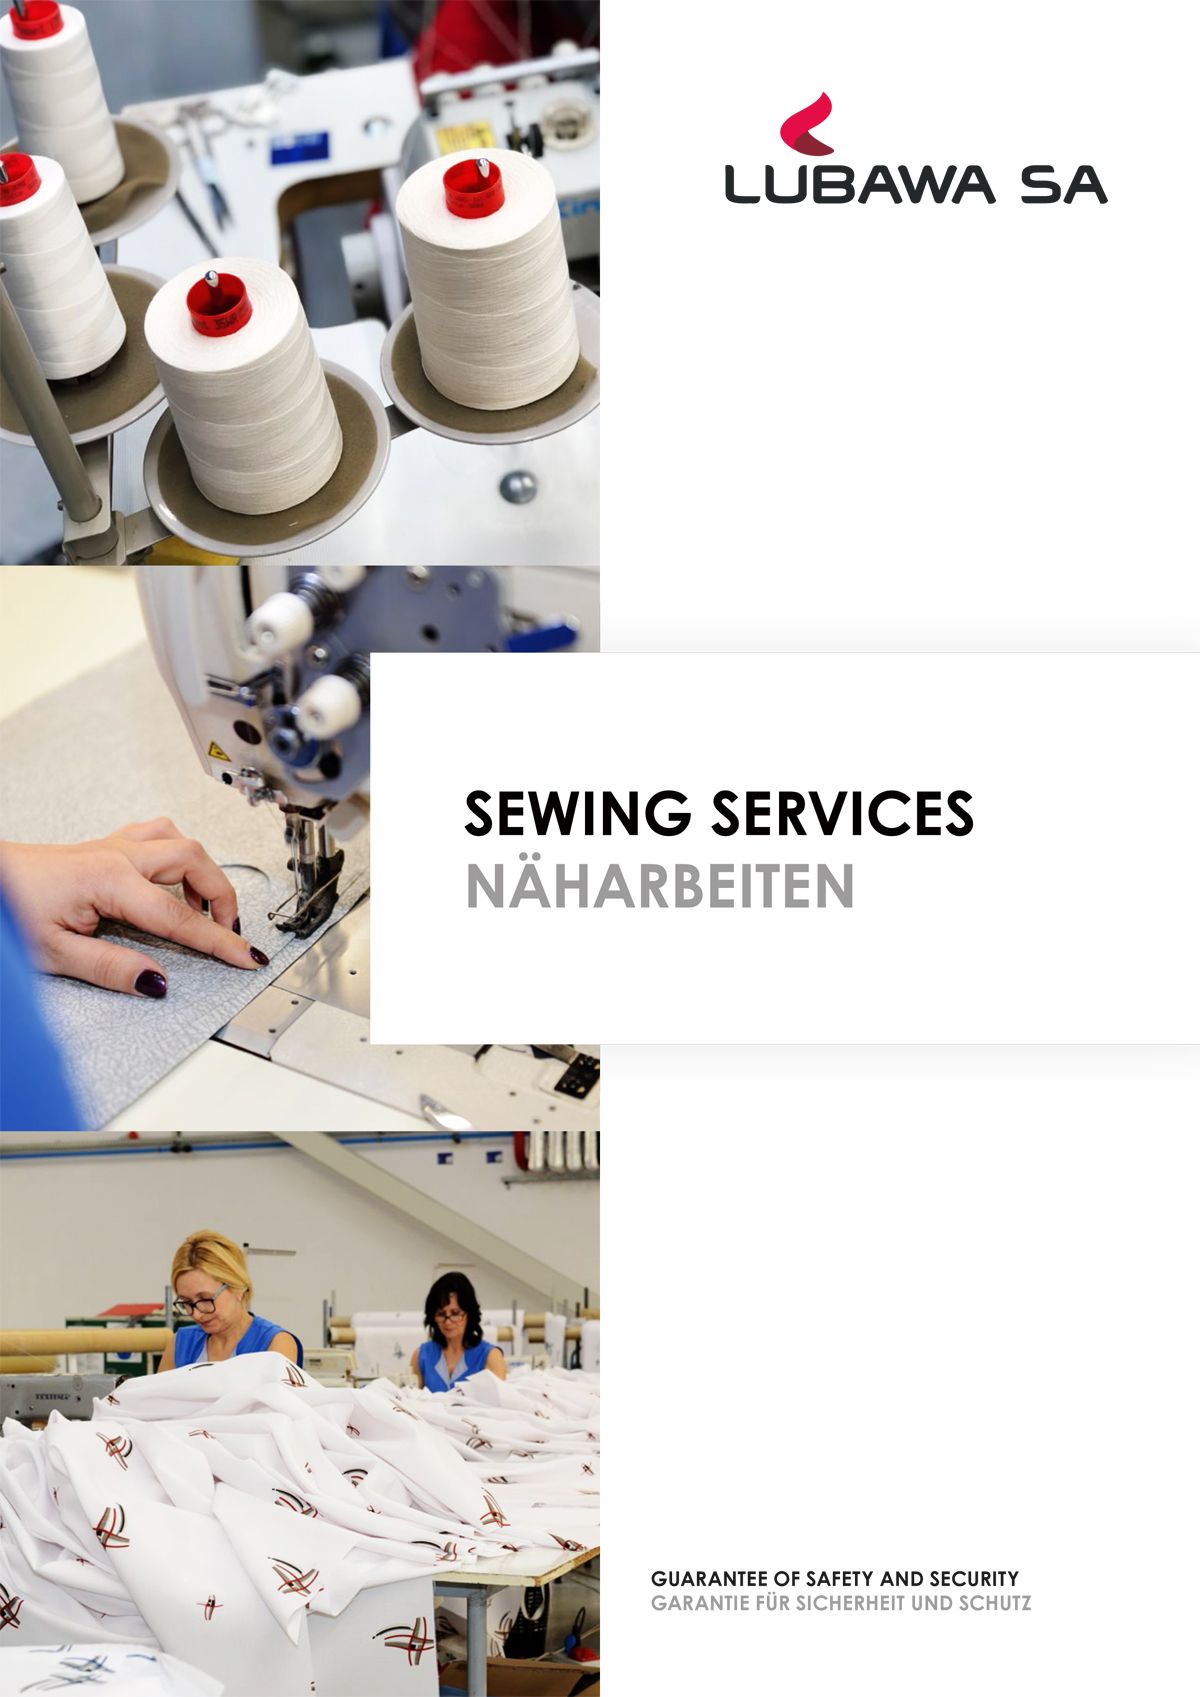 SEWING SERVICES